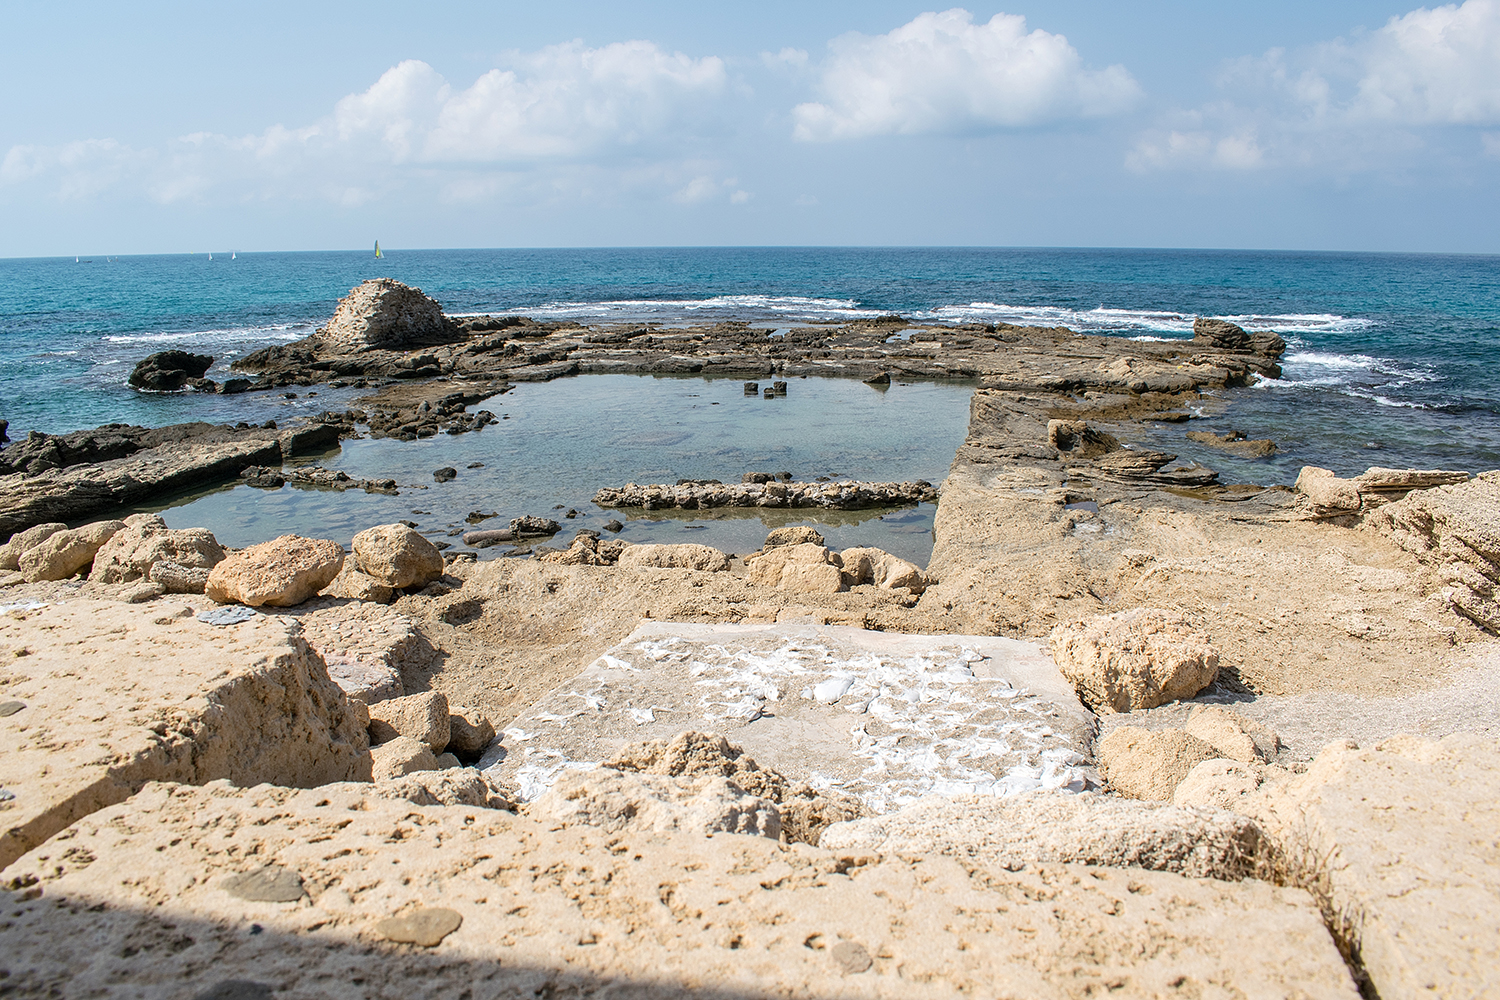 The ruins of Caesarea ancient port in Israel, which are 2,000 years old and one of the world's most unique underwater museums